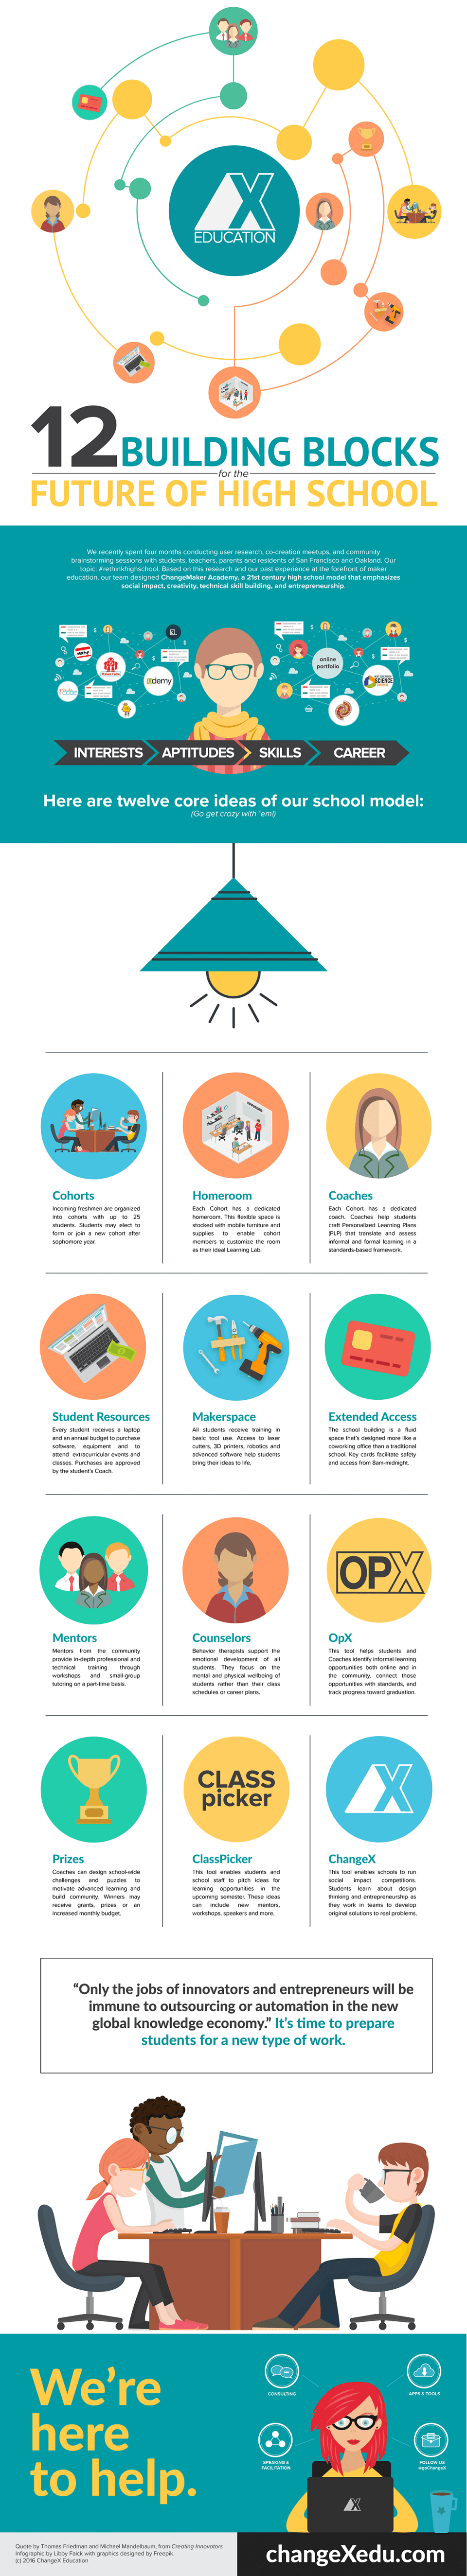 12 Building Blocks for the Future of High School Infographic